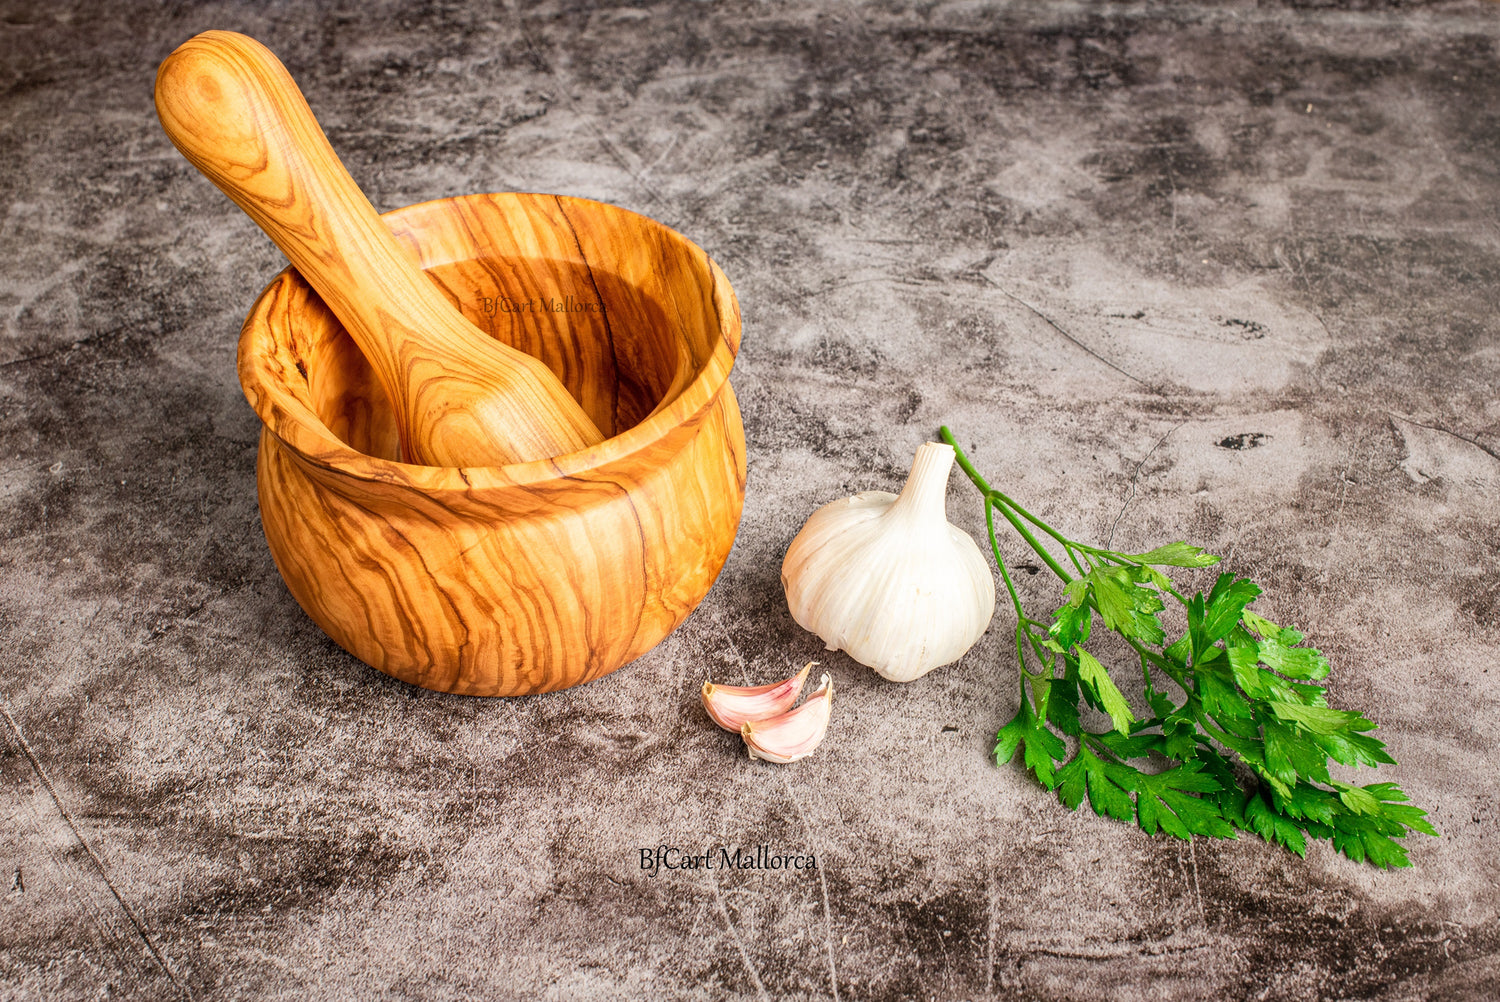 Mortar and Pestle Wooden